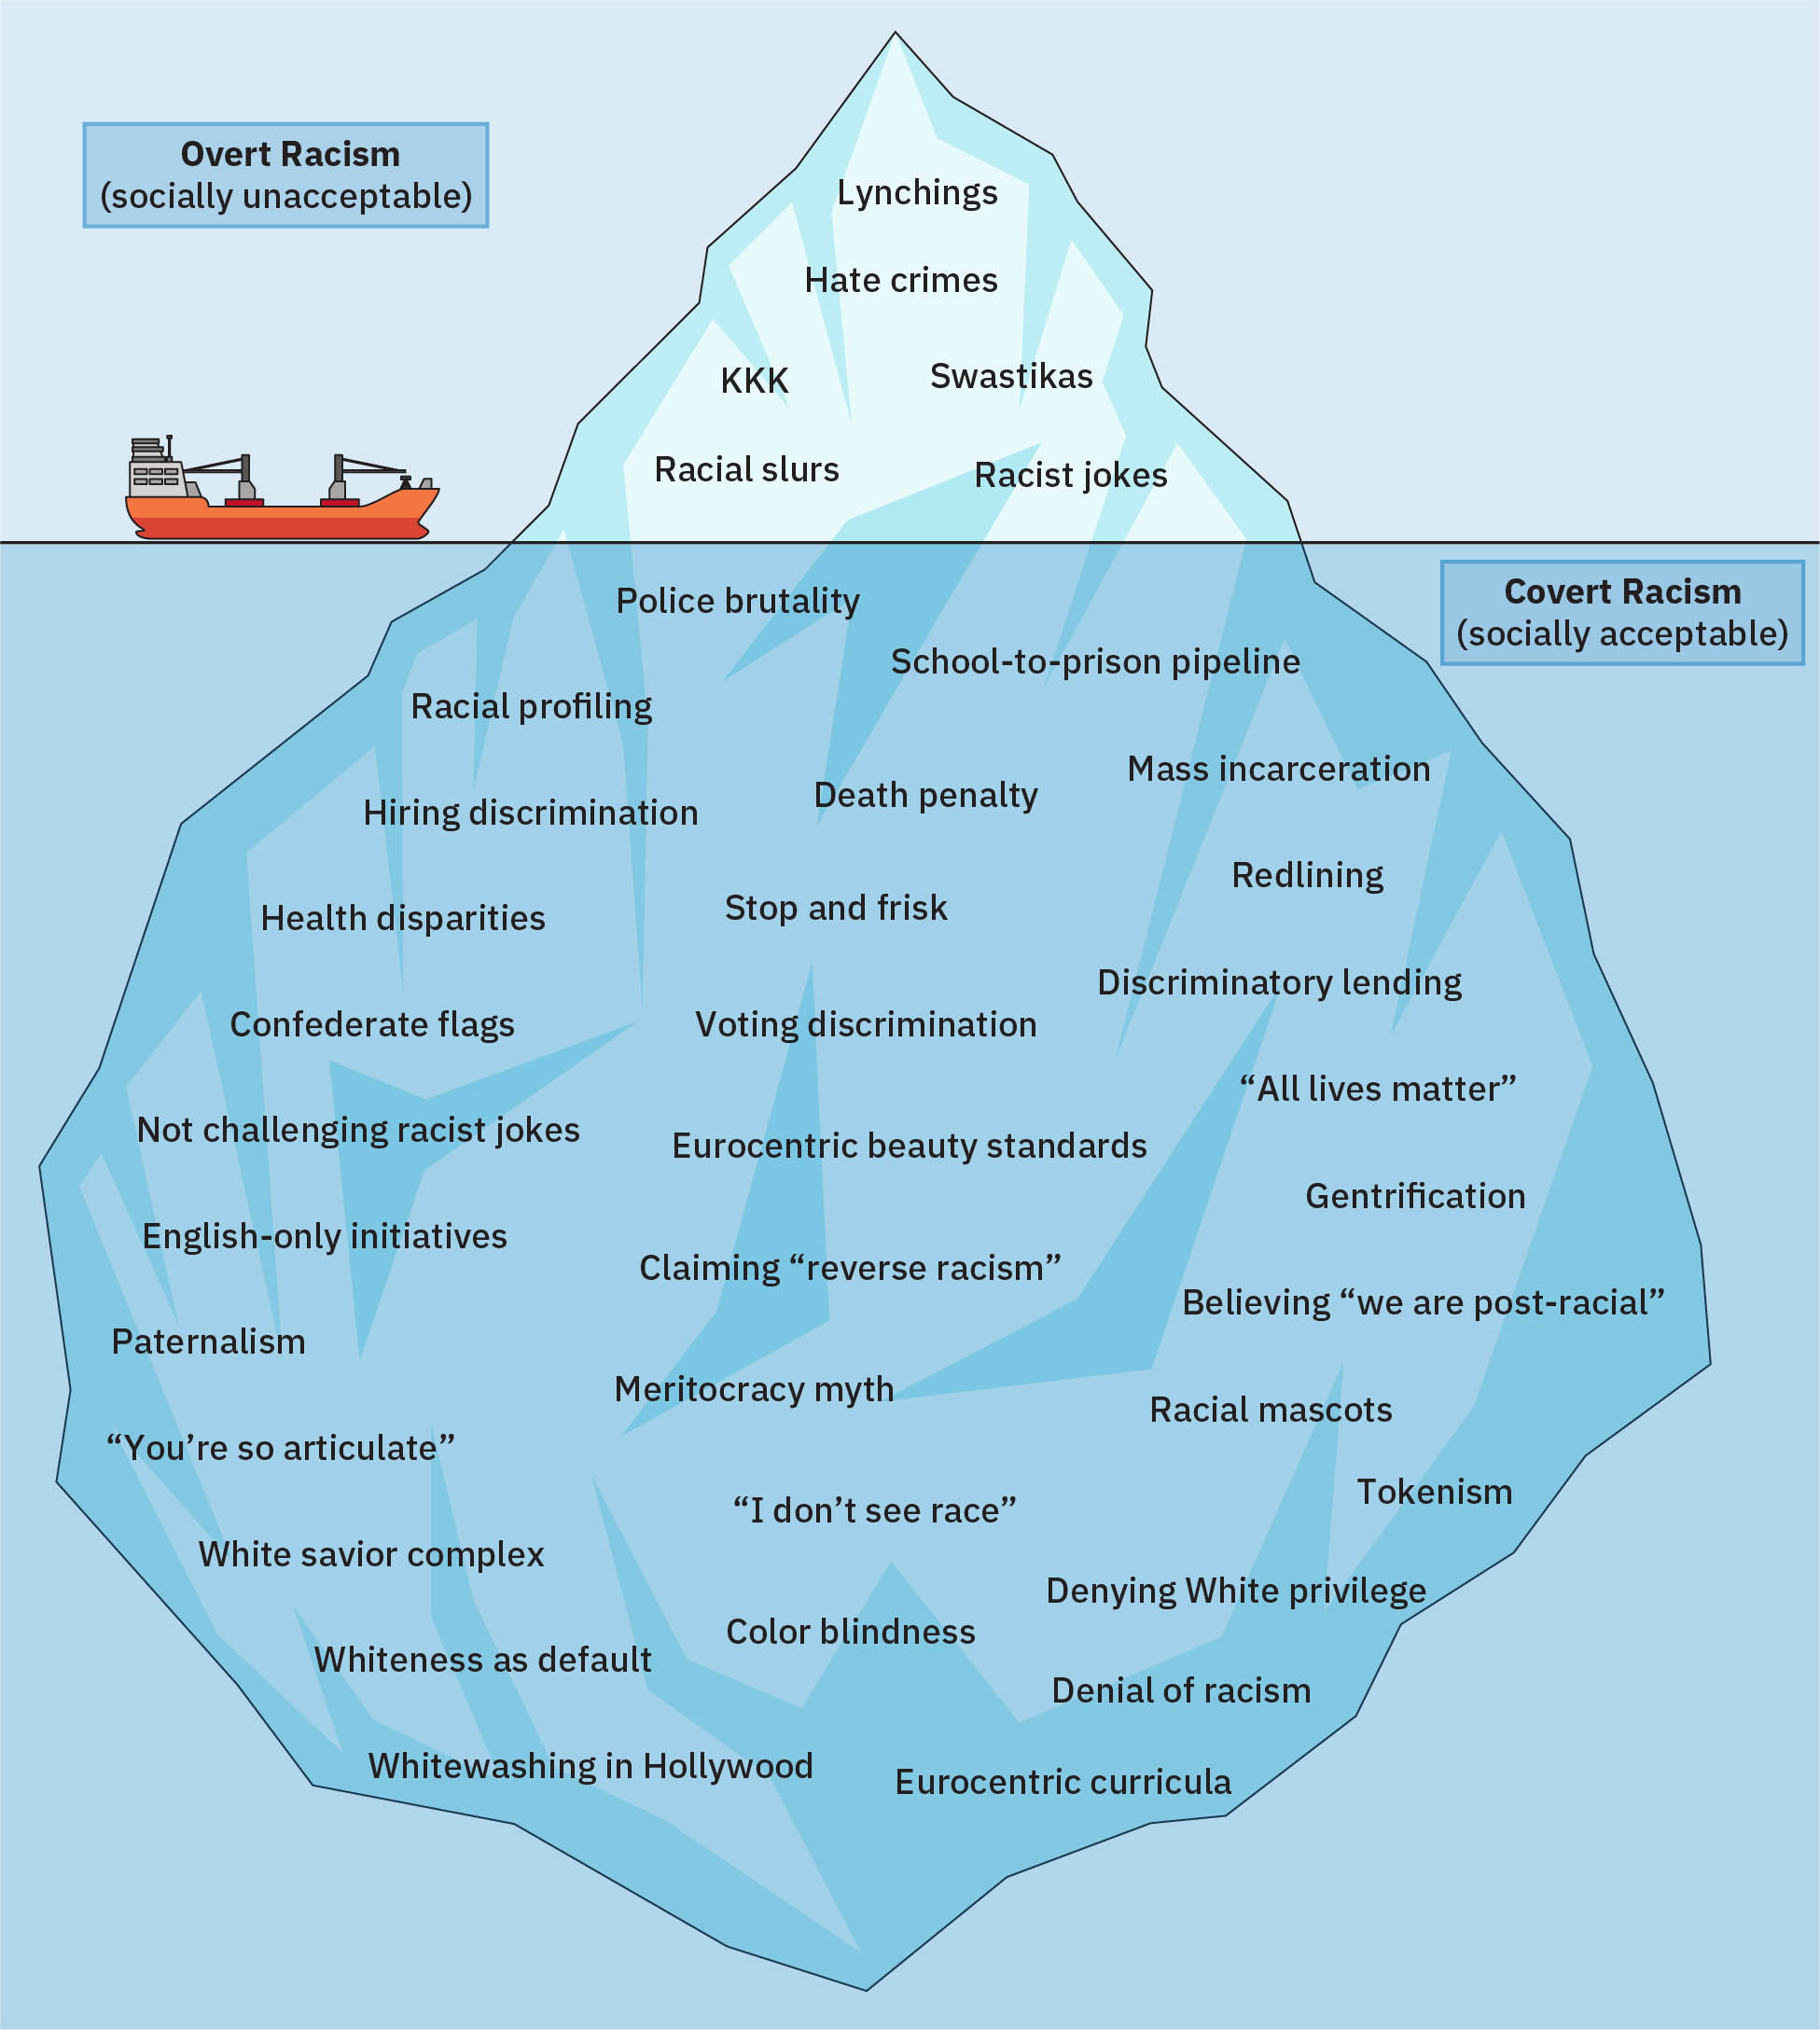 Sketch of a large floating iceberg, with a tip above the water and the rest beneath the surface. The area sticking out of the water is labelled “Overt Racism (socially unacceptable)”. In this portion are the phrases “Lynchings”, “Hate crimes”, “KKK”, “Swastikas”, “Racial slurs”, and “Racist jokes”. The area beneath the surface is labelled “Covert Racism (socially acceptable)”. In this portion are approximately 30 phrases, among them “Racial profiling”, “Mass incarceration”, “Voting discrimination”, “Eurocentric beauty standards”, “Meritocracy myth”, and “Denial of racism”.